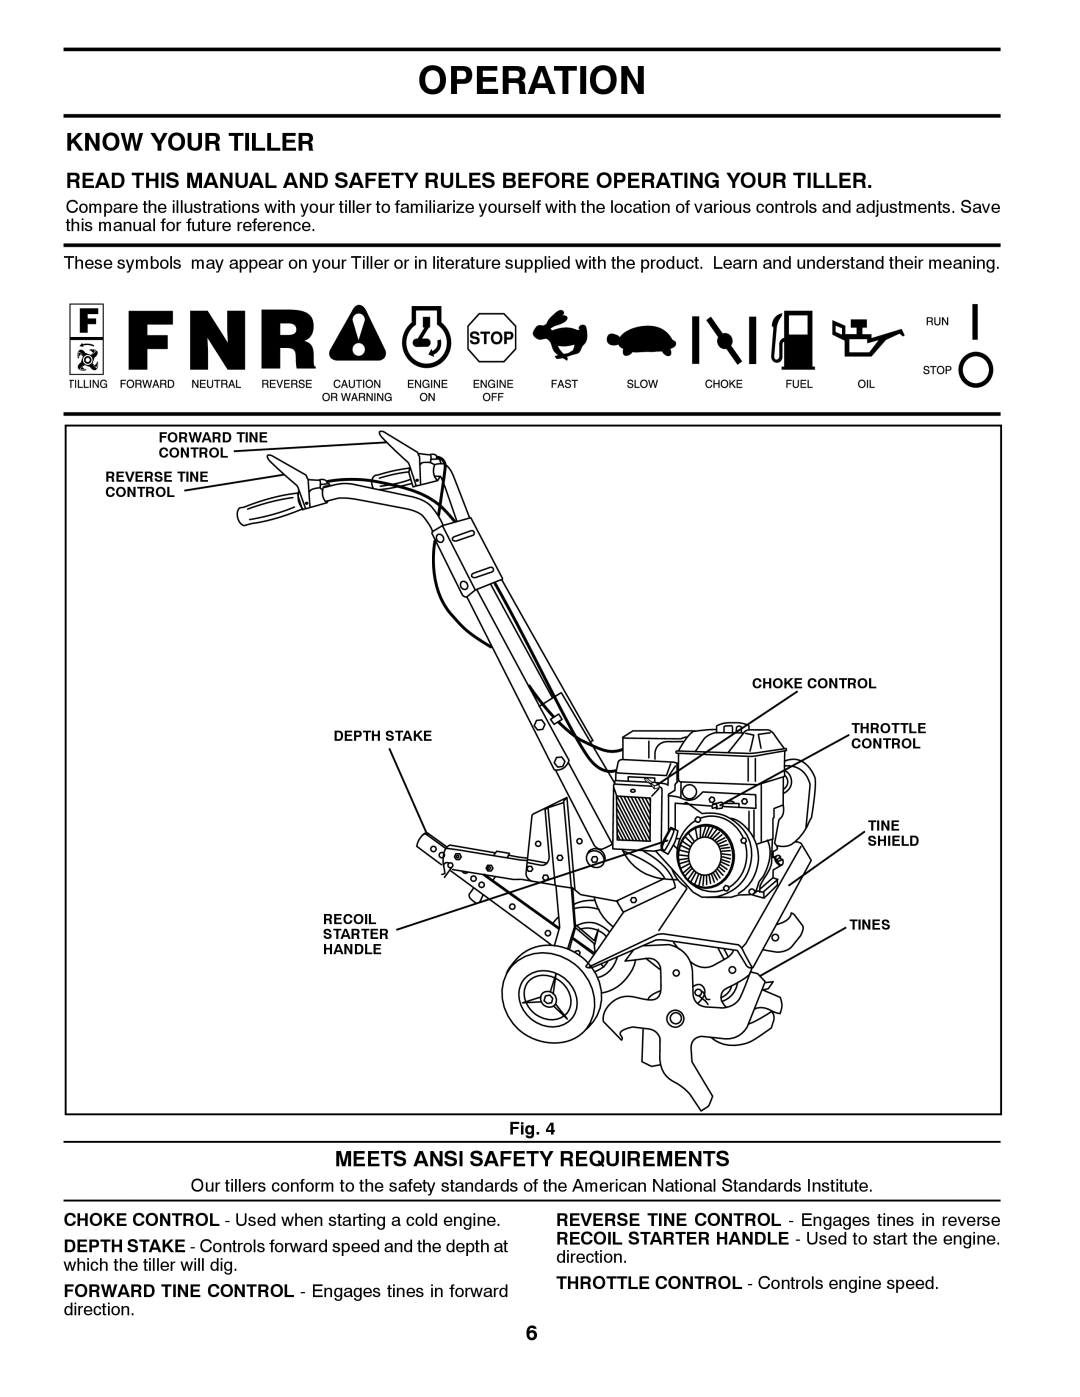 Husqvarna FT900 owner manual Operation, Know Your Tiller, Read This Manual And Safety Rules Before Operating Your Tiller 